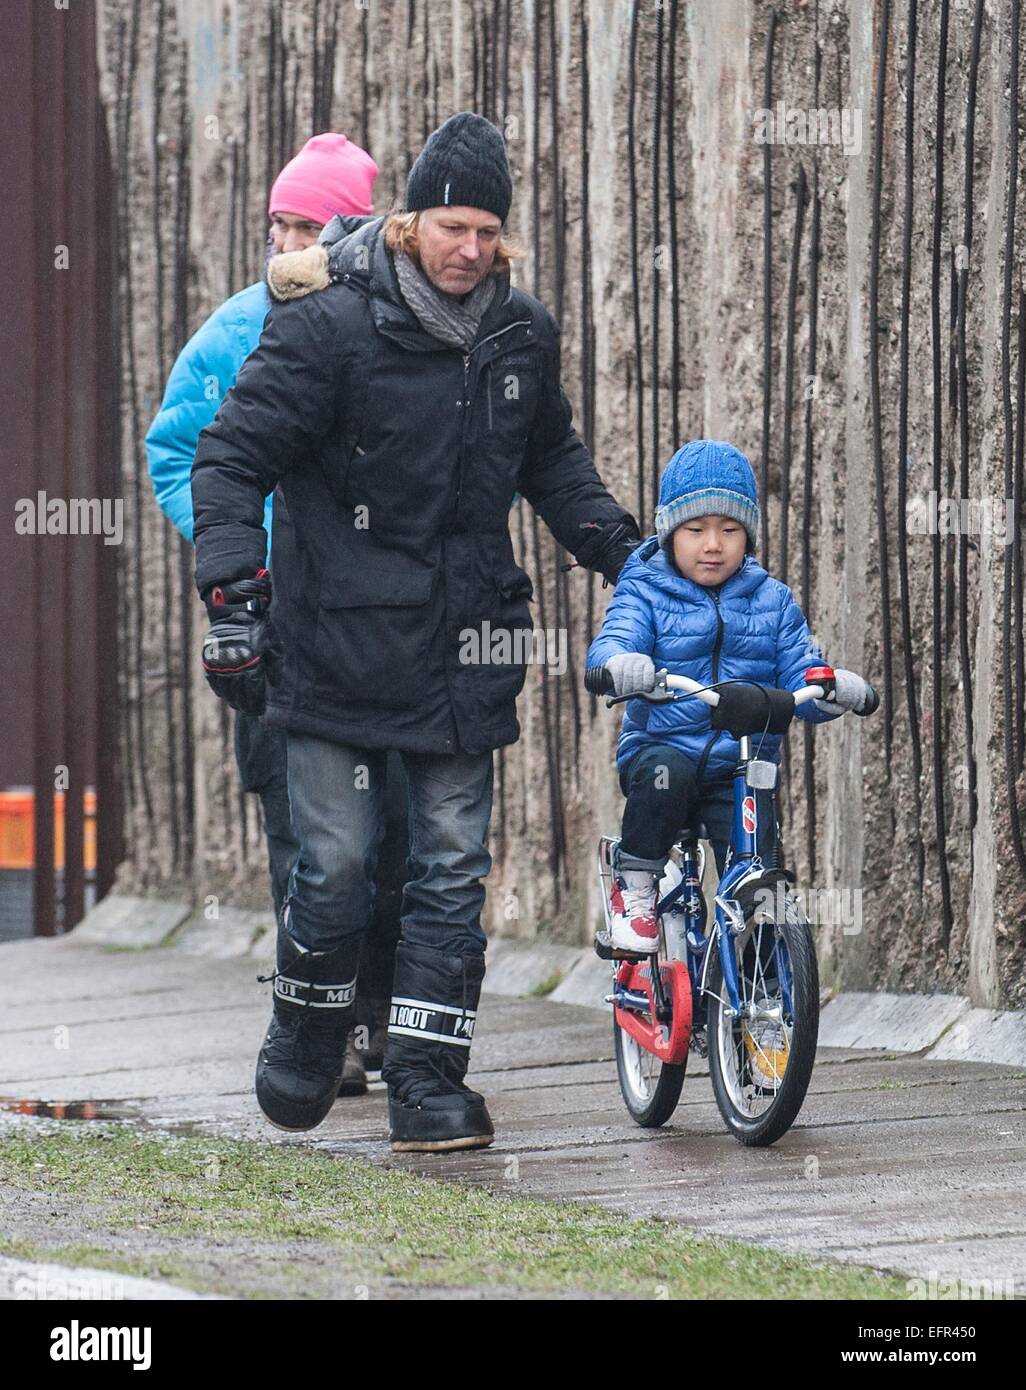 Director and producer Claus Clausen runs next to Lao (6), the son of Chinese artist Ai Weiwei who rides a bike along the Berlin Wall Memorial Bernauer Strasse in Berlin, Germany, 09 February 2015. The boy has the lead role in the short film 'Berlin, I Love You', directed by Ai Weiwei. Because Ai Weiwei can't leave his home country he directs the film via sattelite through multiple skype camera feeds. Photo: Paul Zinken/dpa Stock Photo